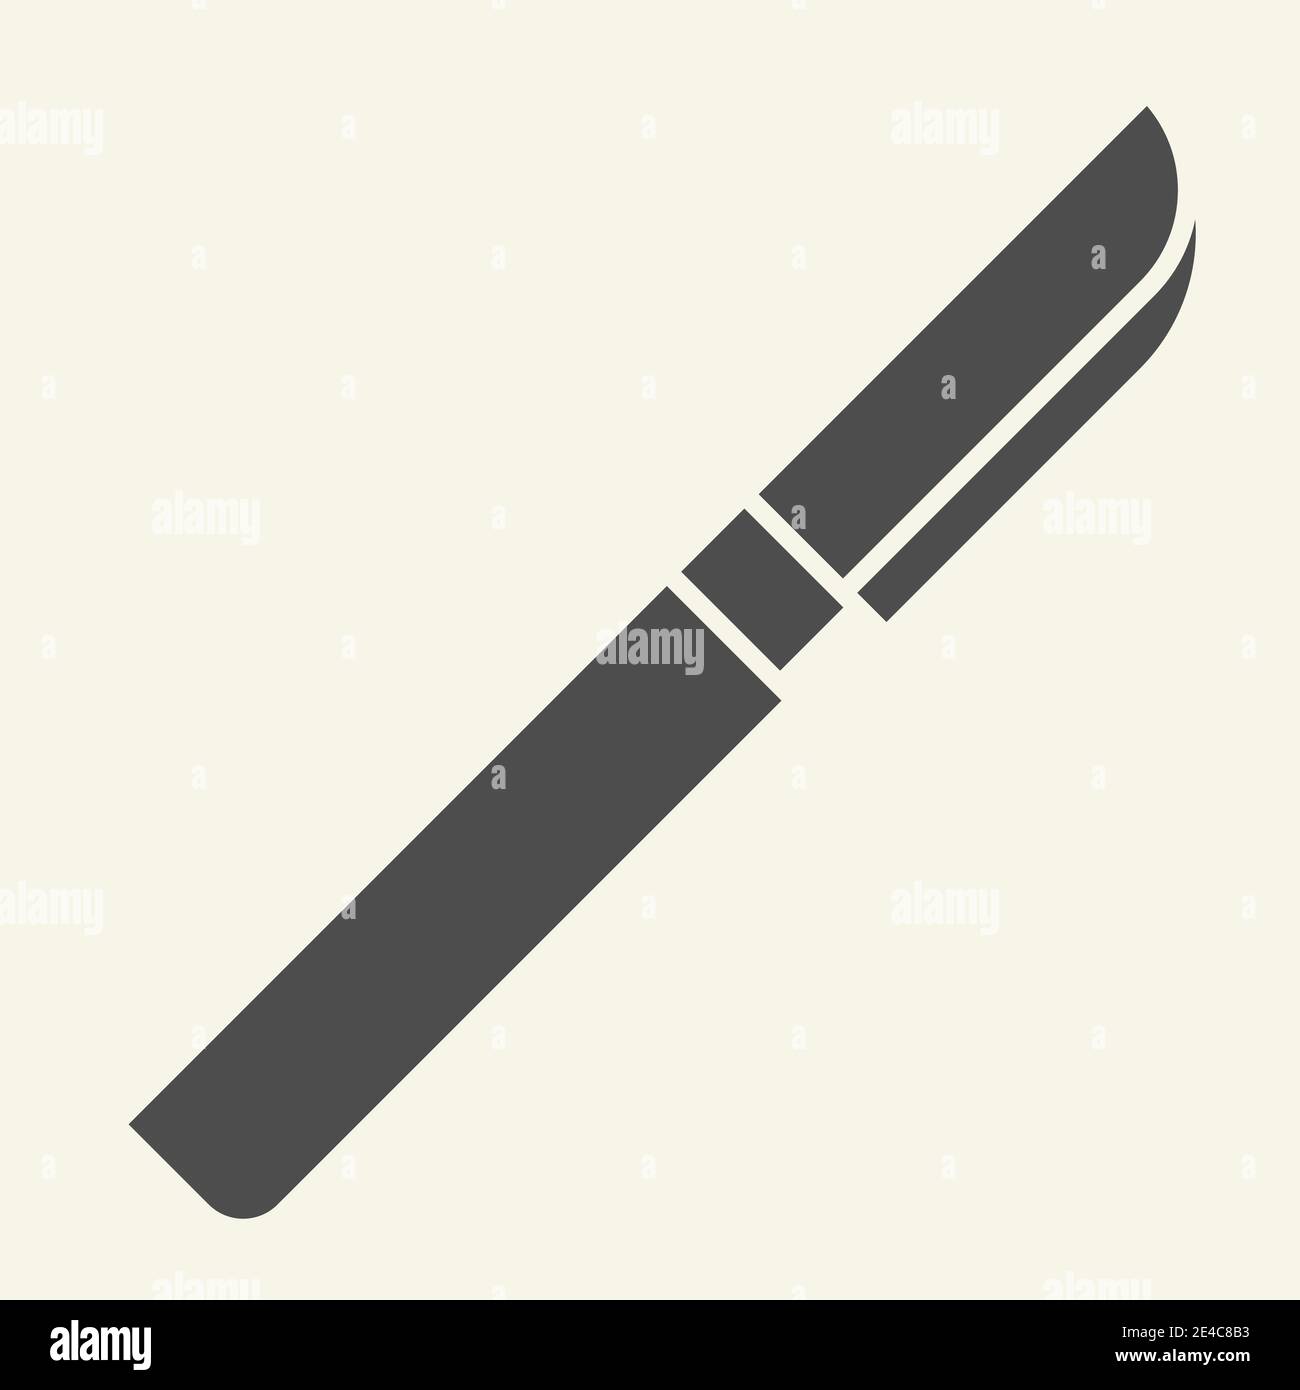 Scalpel solid icon. Medical surgeon tool glyph style pictogram on white background. Surgical scalpel knife symbol for mobile concept and web design Stock Vector